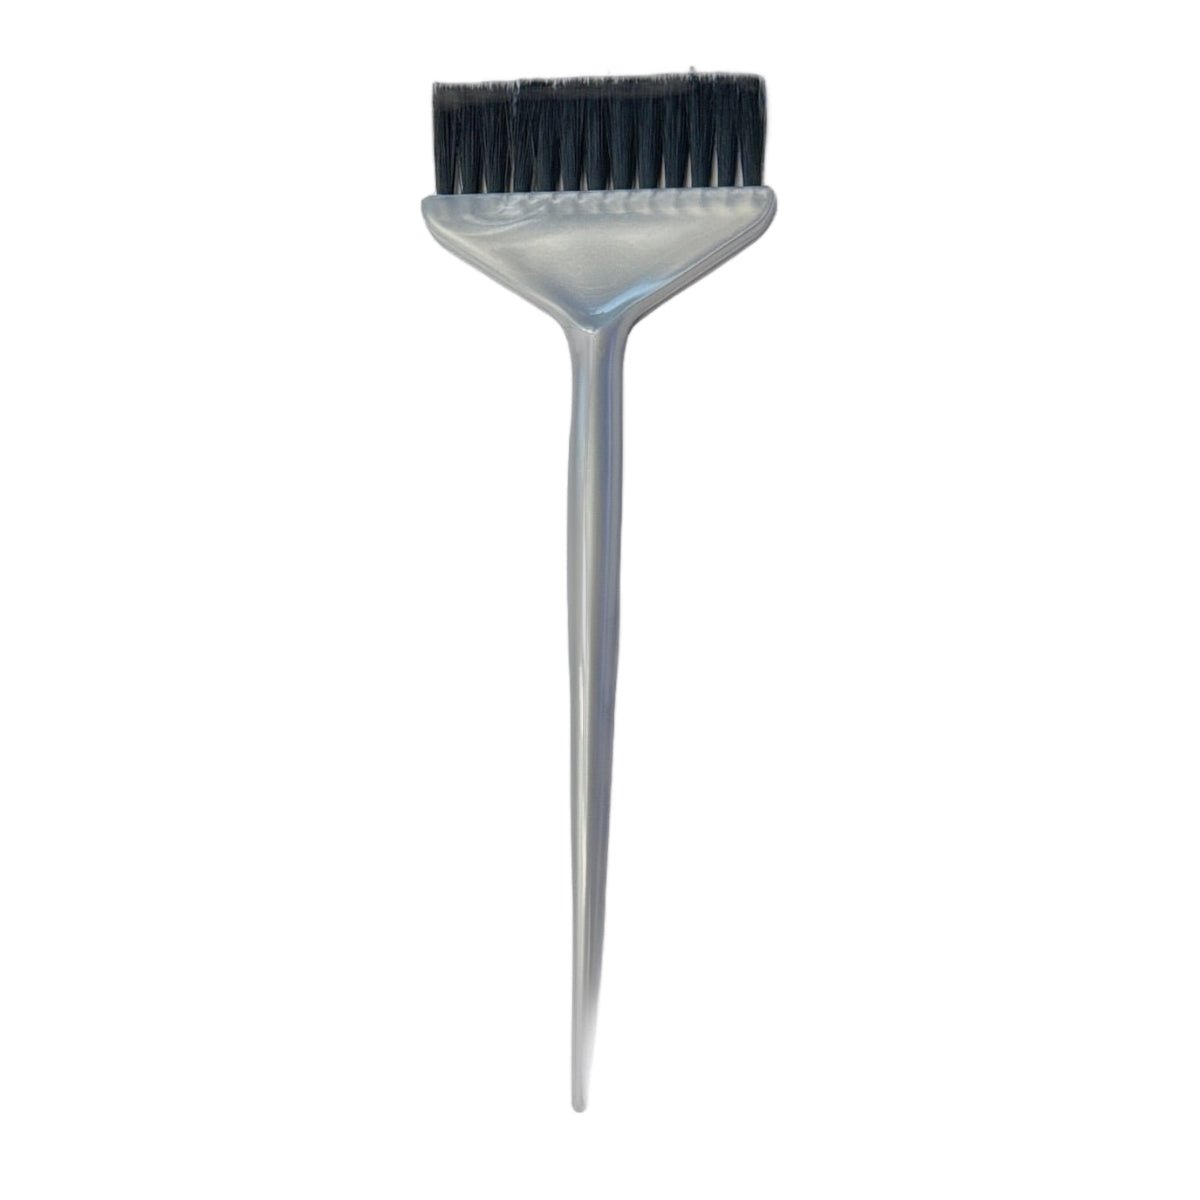 Tint Brush Large - Precise Hair Colouring Tool for Full Coverage - beautyhair.co.ukHair Tinting Briush